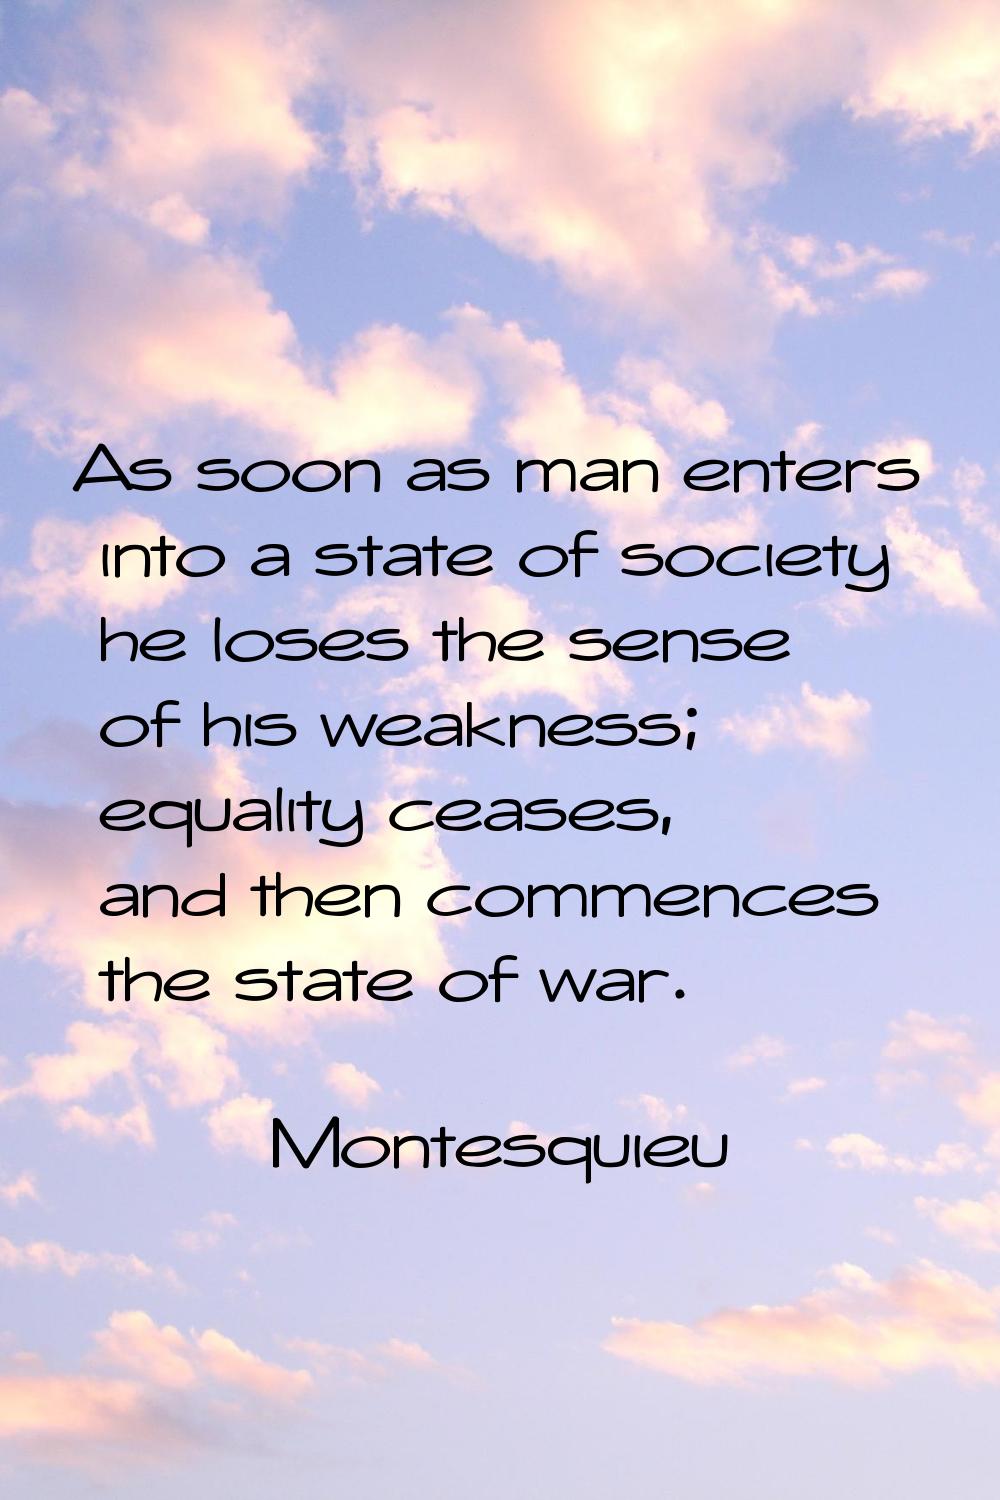 As soon as man enters into a state of society he loses the sense of his weakness; equality ceases, 